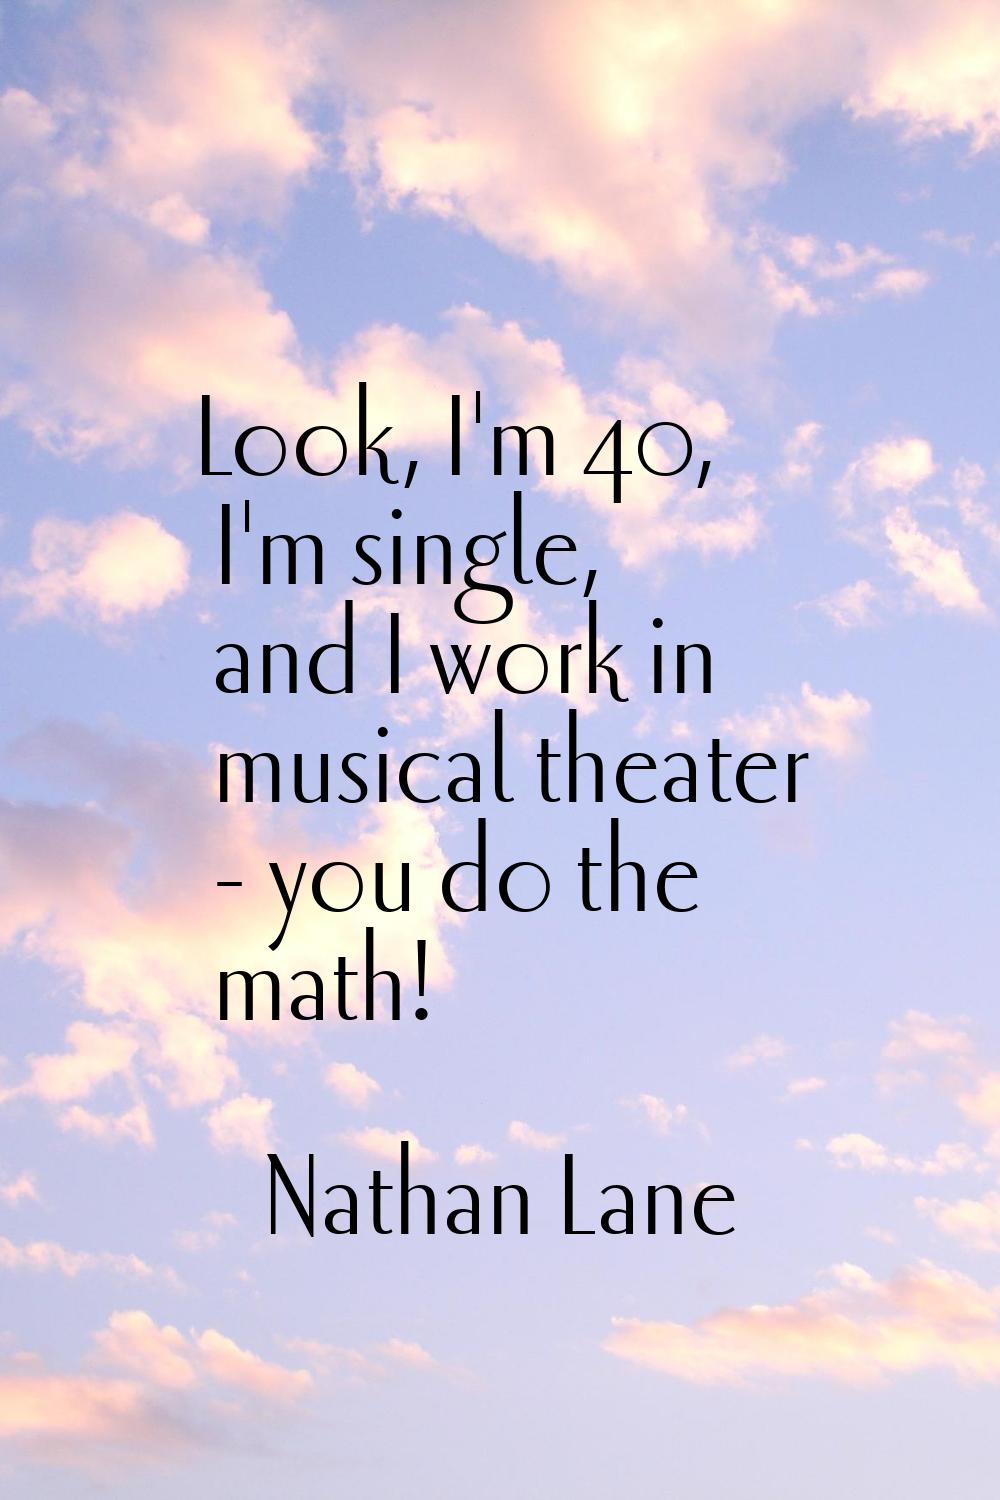 Look, I'm 40, I'm single, and I work in musical theater - you do the math!